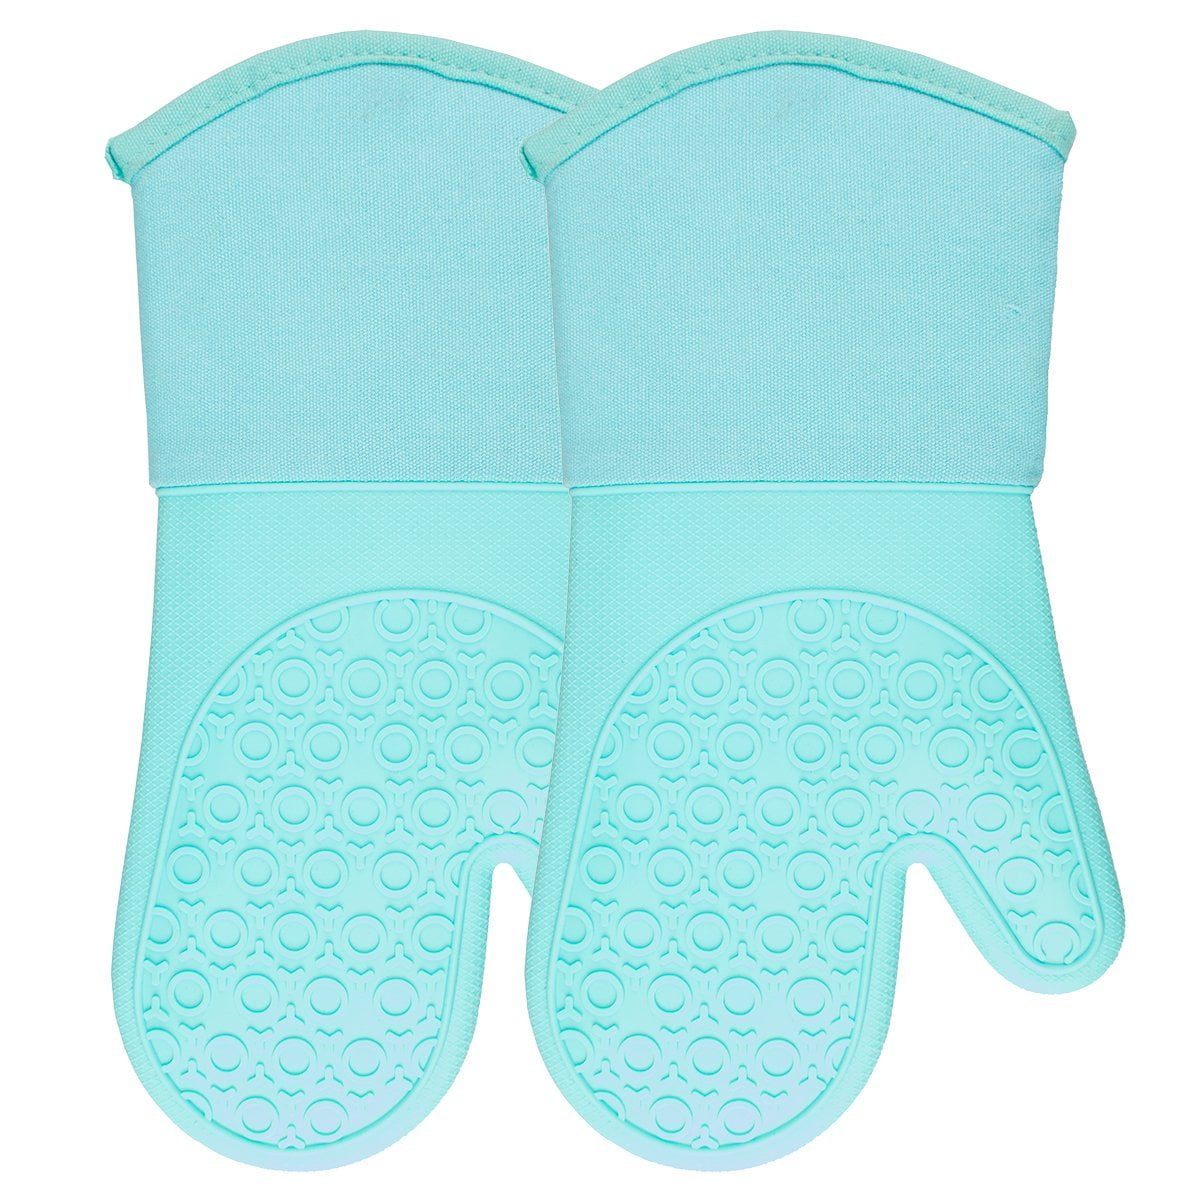 Extra Long Professional Silicone Oven Mitt - 1 Pair - Non-slip Oven ...